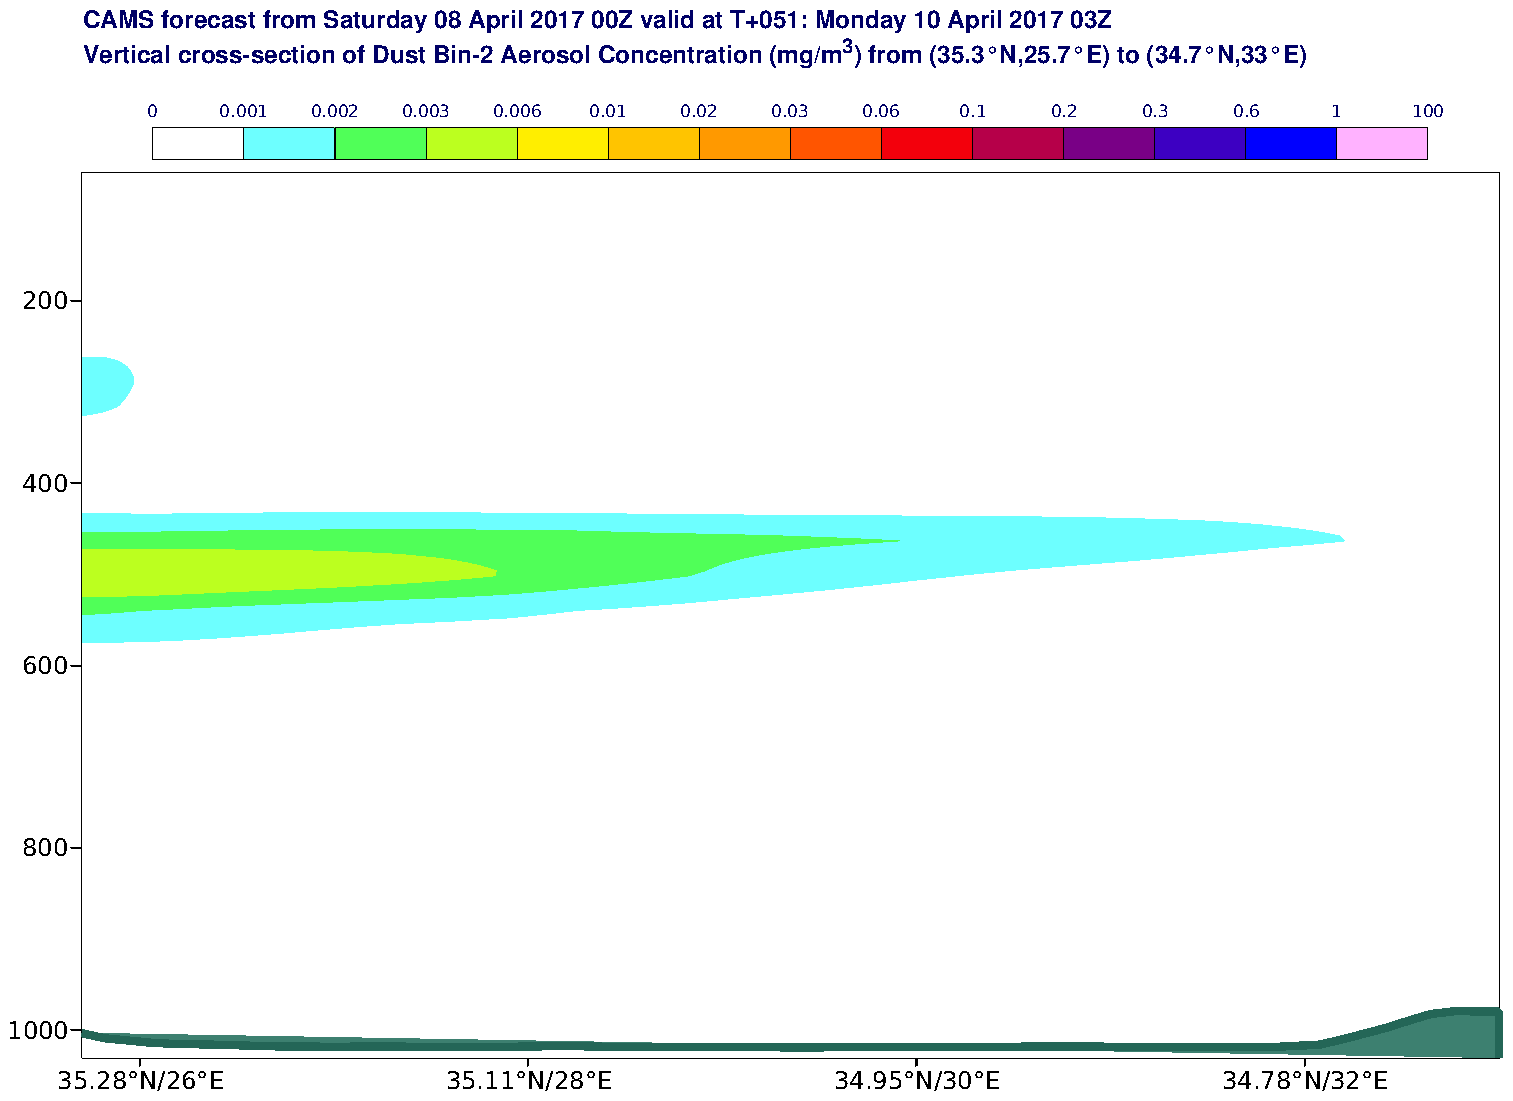 Vertical cross-section of Dust Bin-2 Aerosol Concentration (mg/m3) valid at T51 - 2017-04-10 03:00